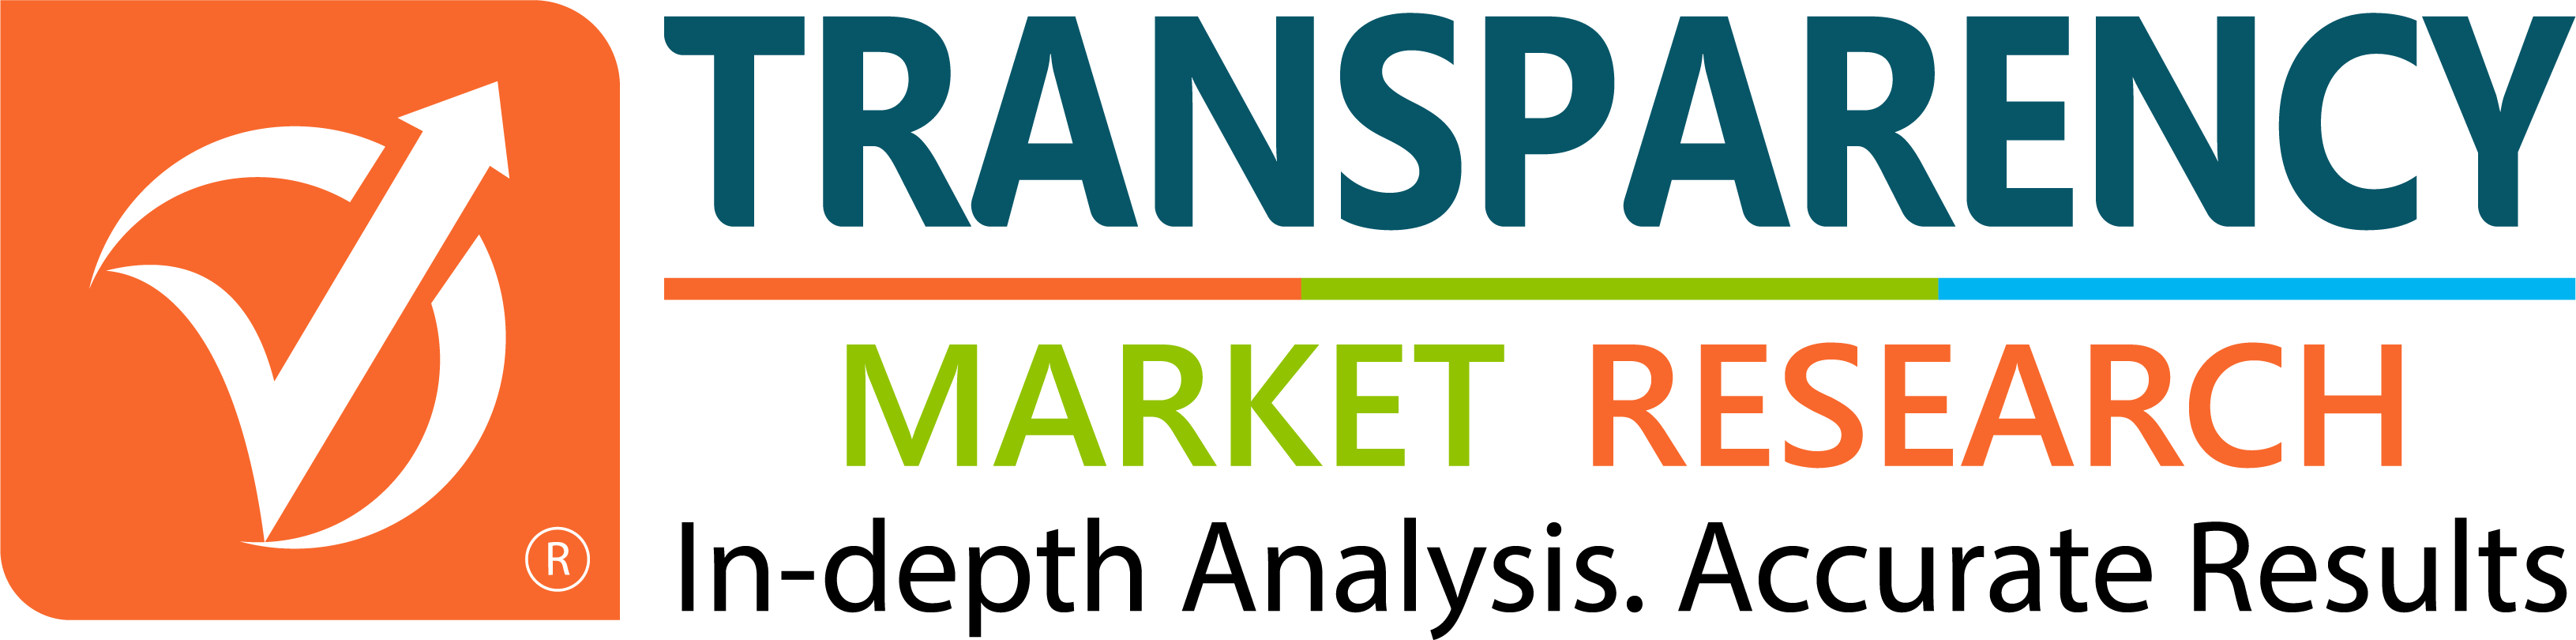 Cardiac pacemakers Market is Expected to Grow at a 7.8% CAGR by 2027, According to Transparency Market Research